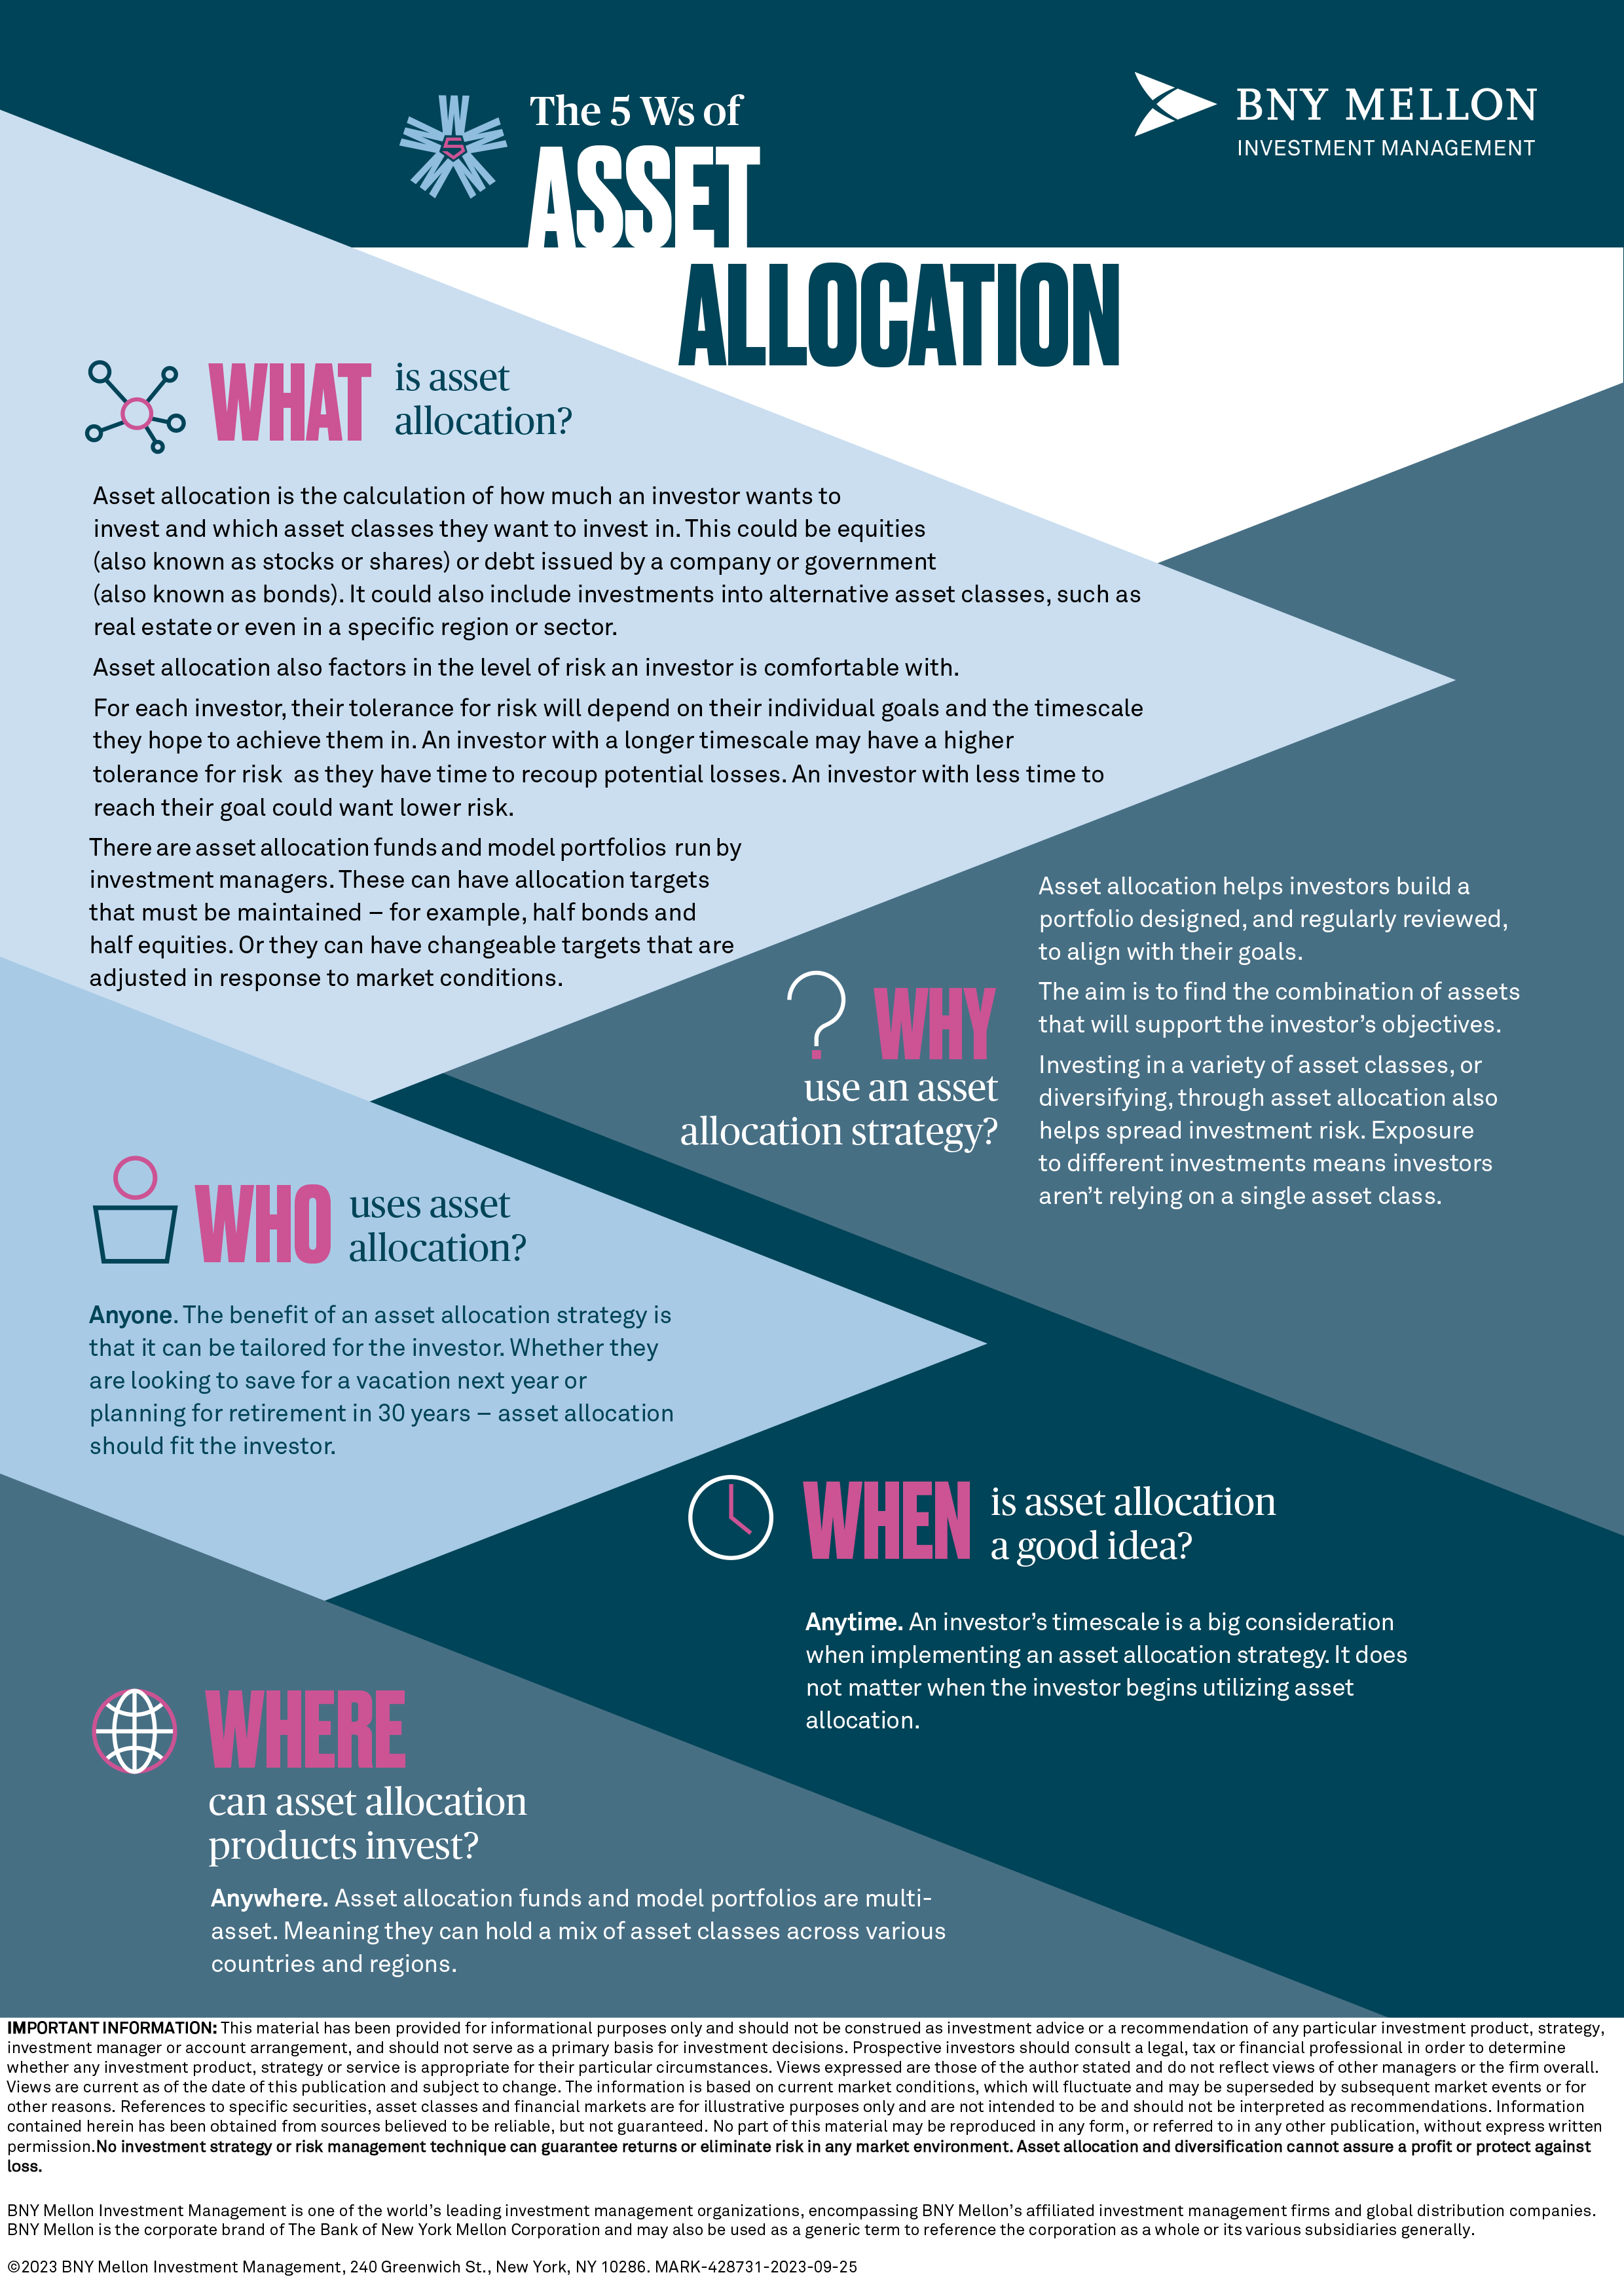 Infographic explaining and defining what asset
allocation is